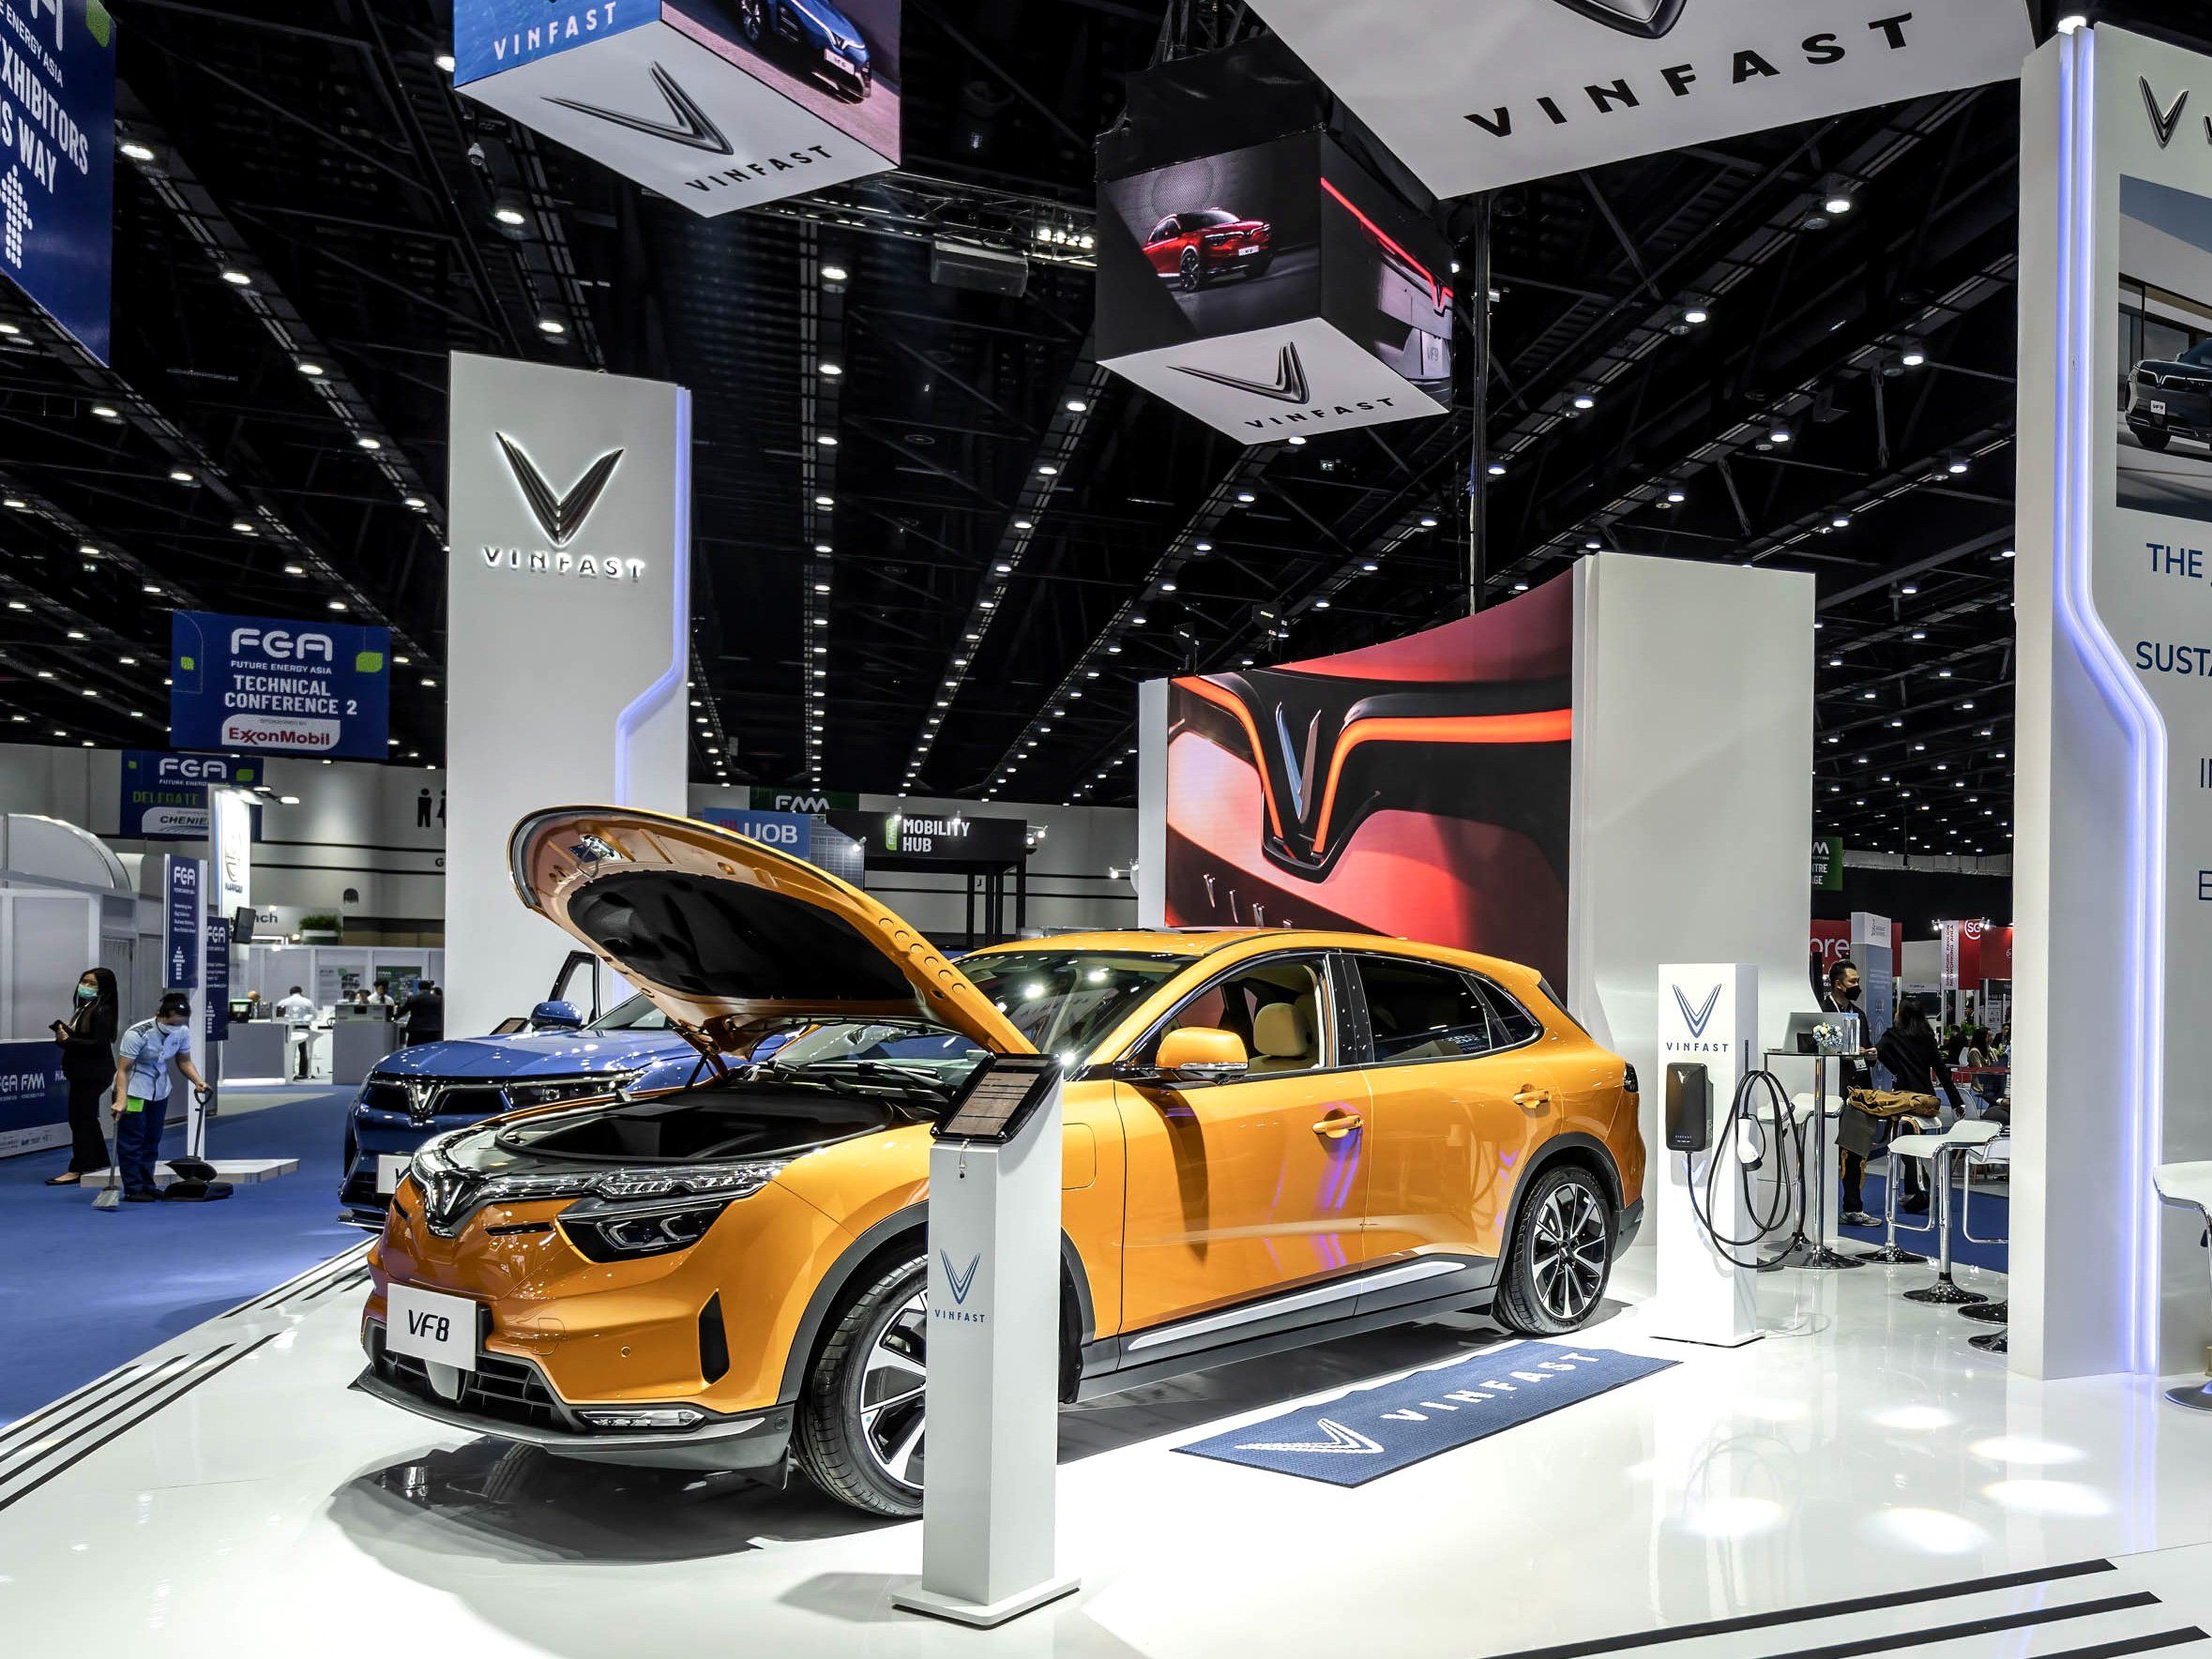 photo of orange electric car in on a white display floor in a large car show exhibition space